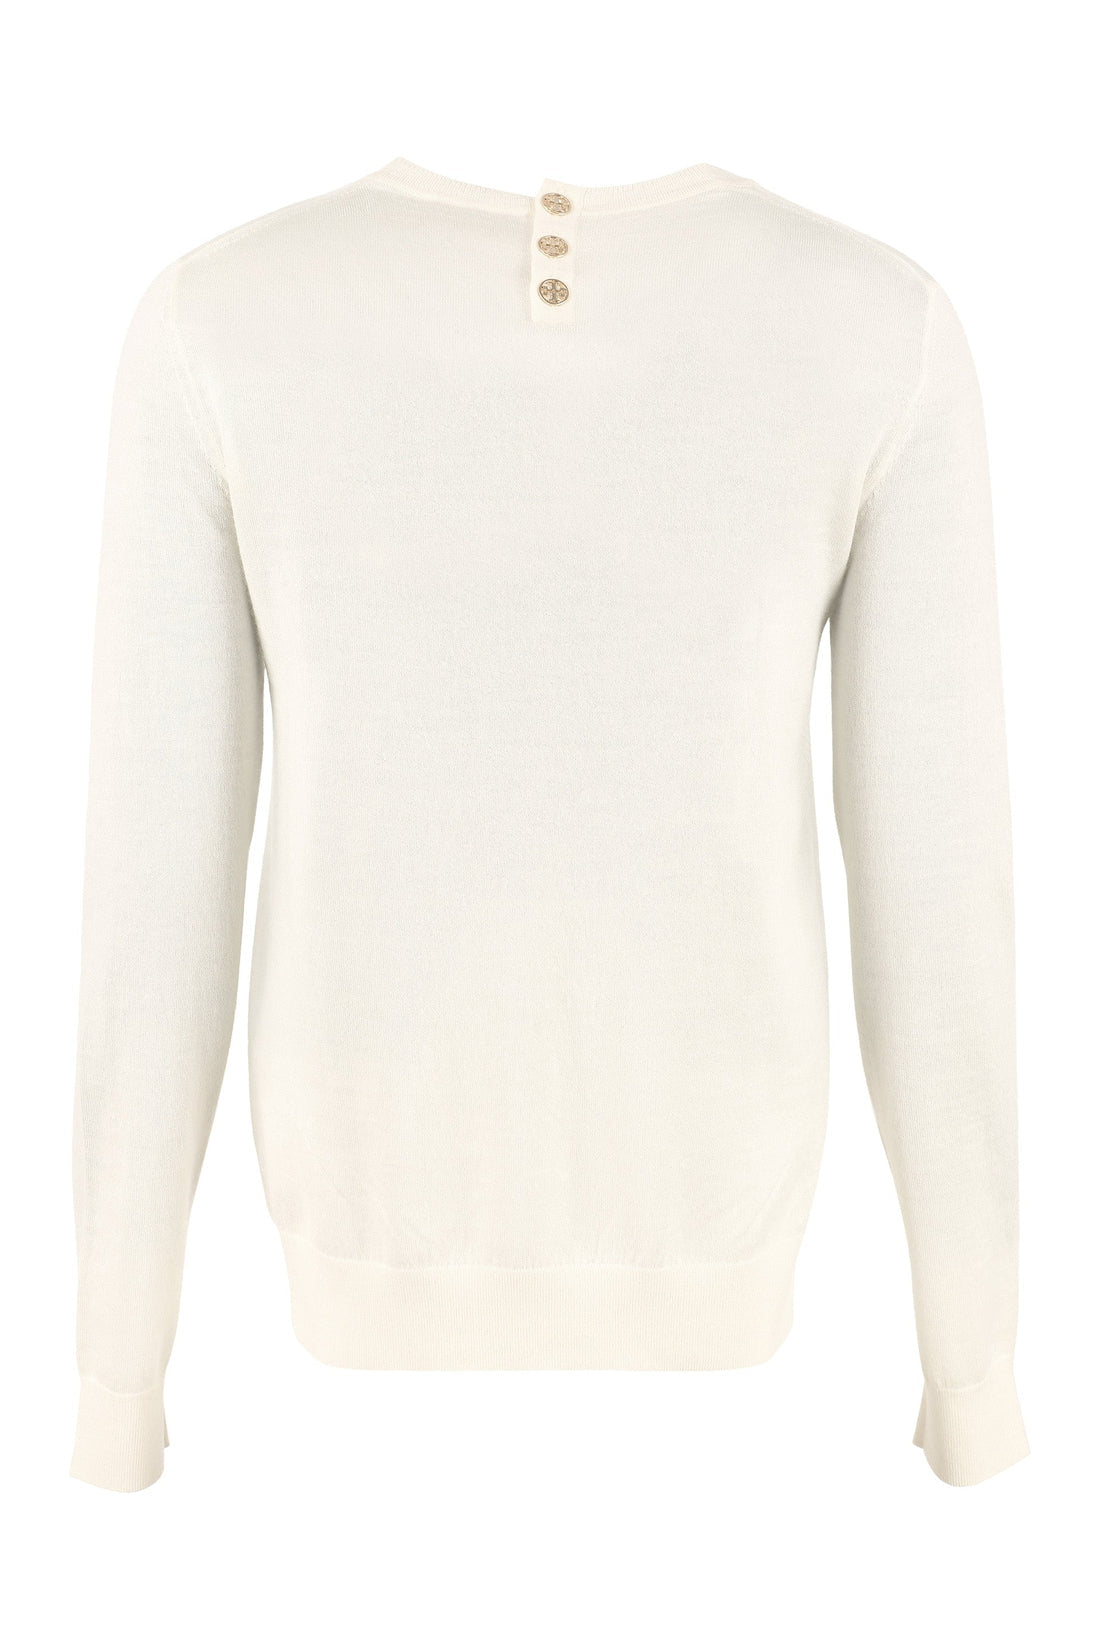 Tory Burch-OUTLET-SALE-Iberia cashmere sweater-ARCHIVIST